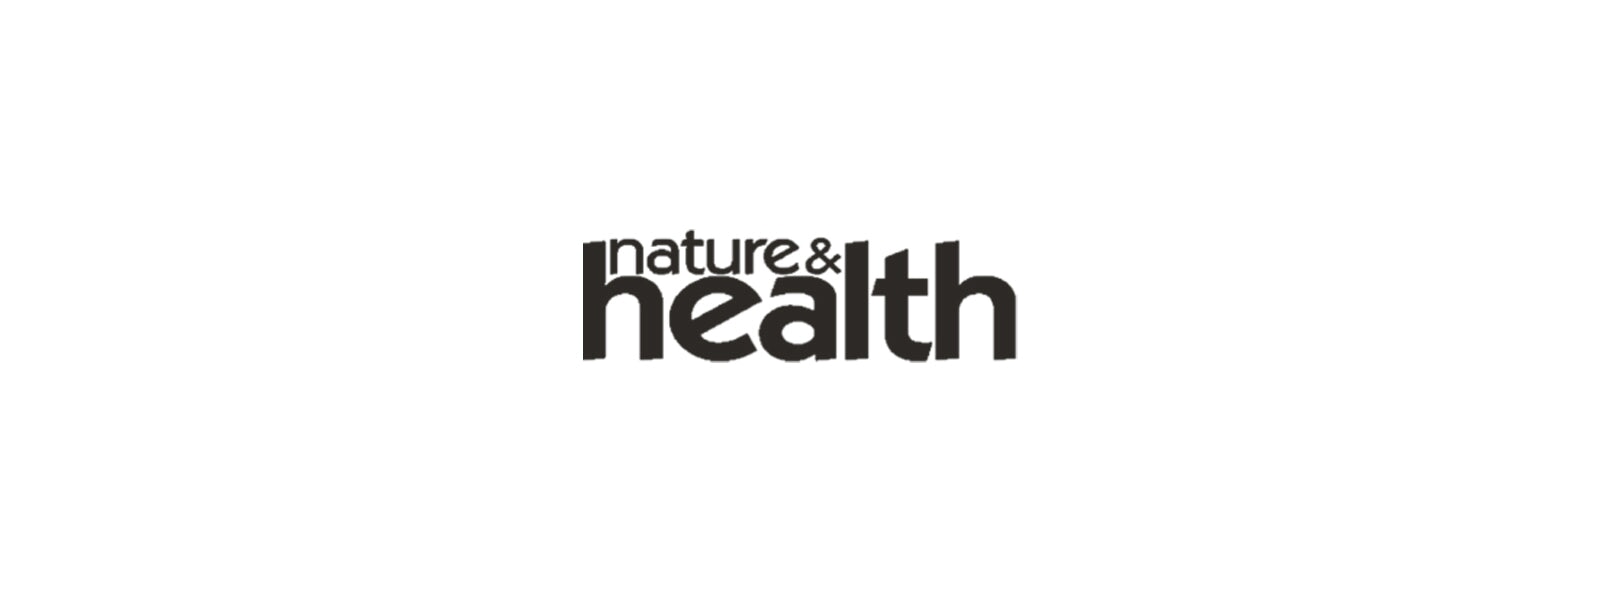 Nature and Health – Drop a decade!